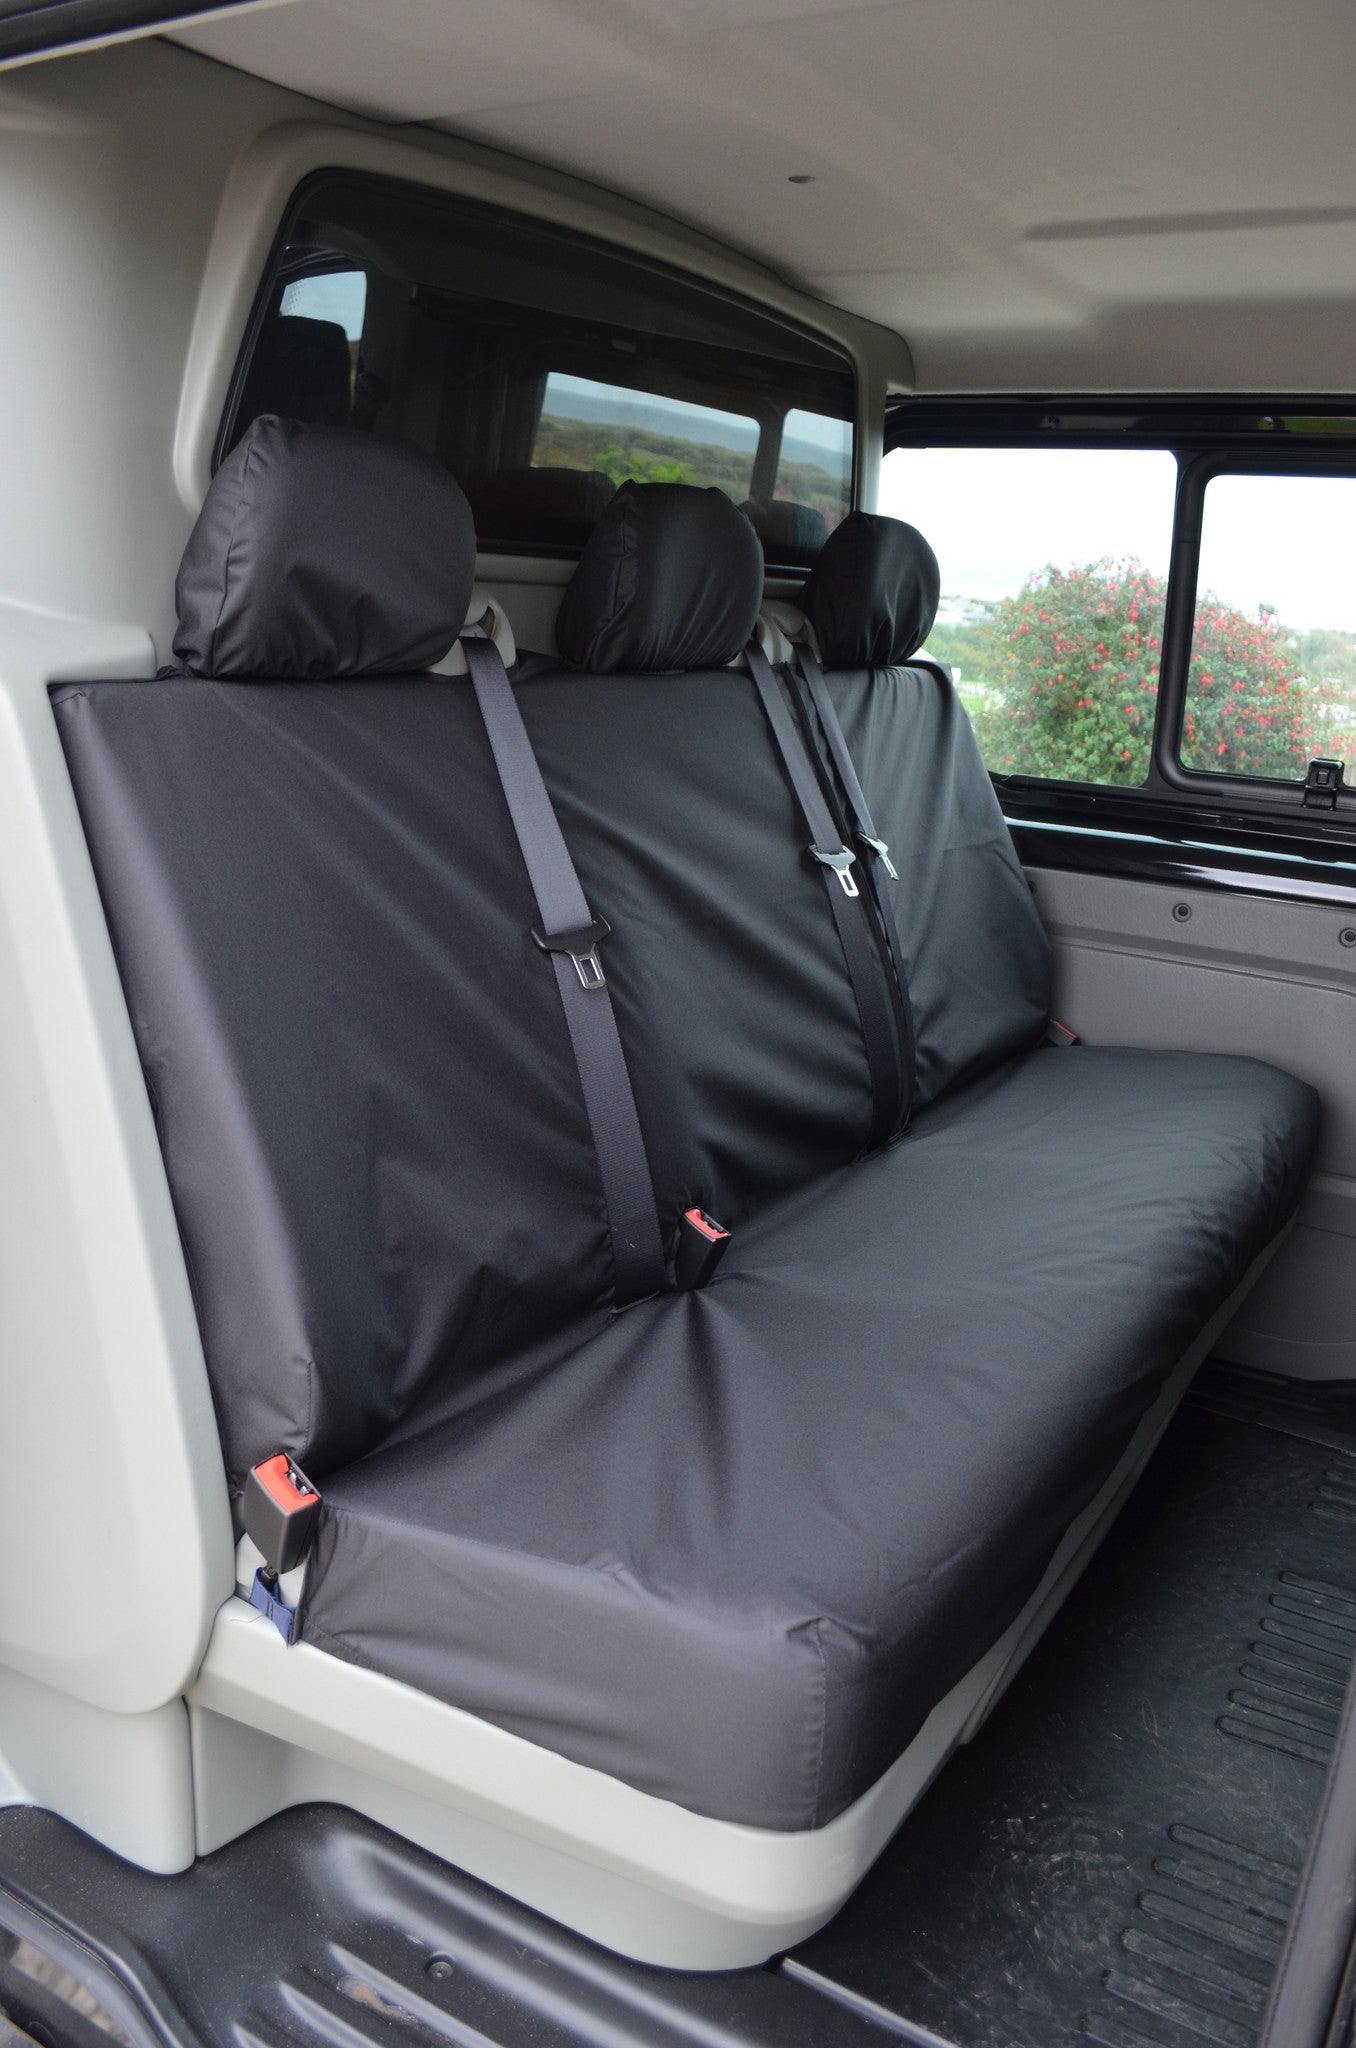 Renault Trafic Crew Cab 2001 - 2006 Rear Seat Covers Black Turtle Covers Ltd